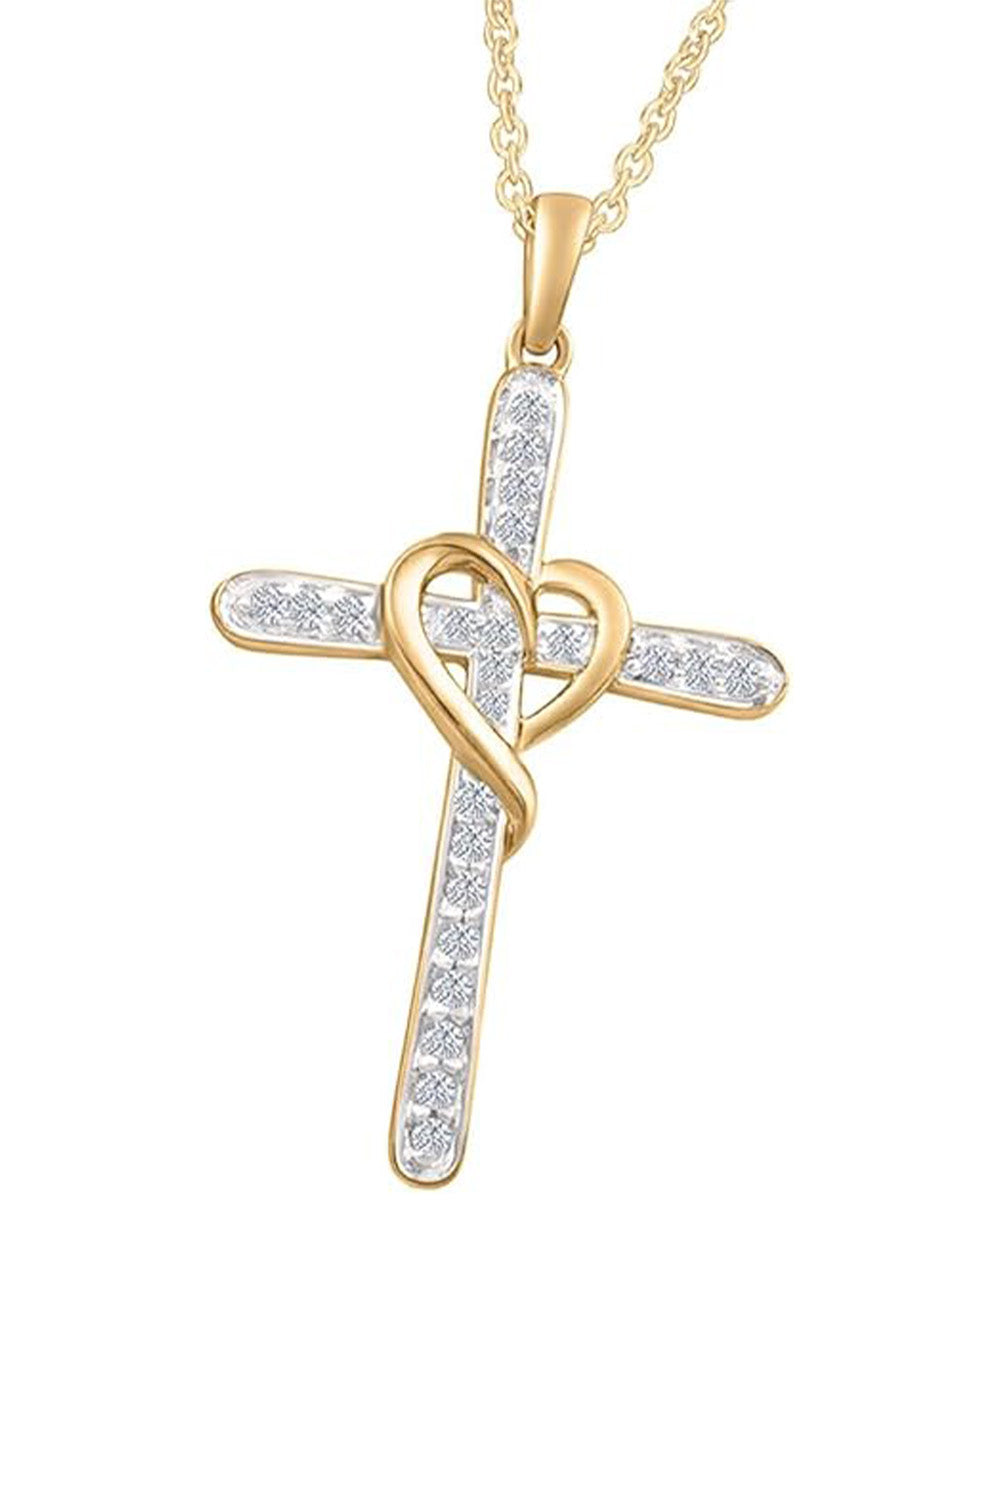 Yellow Gold Color Moissanite Cross Heart Pendant Necklace, Jewellery